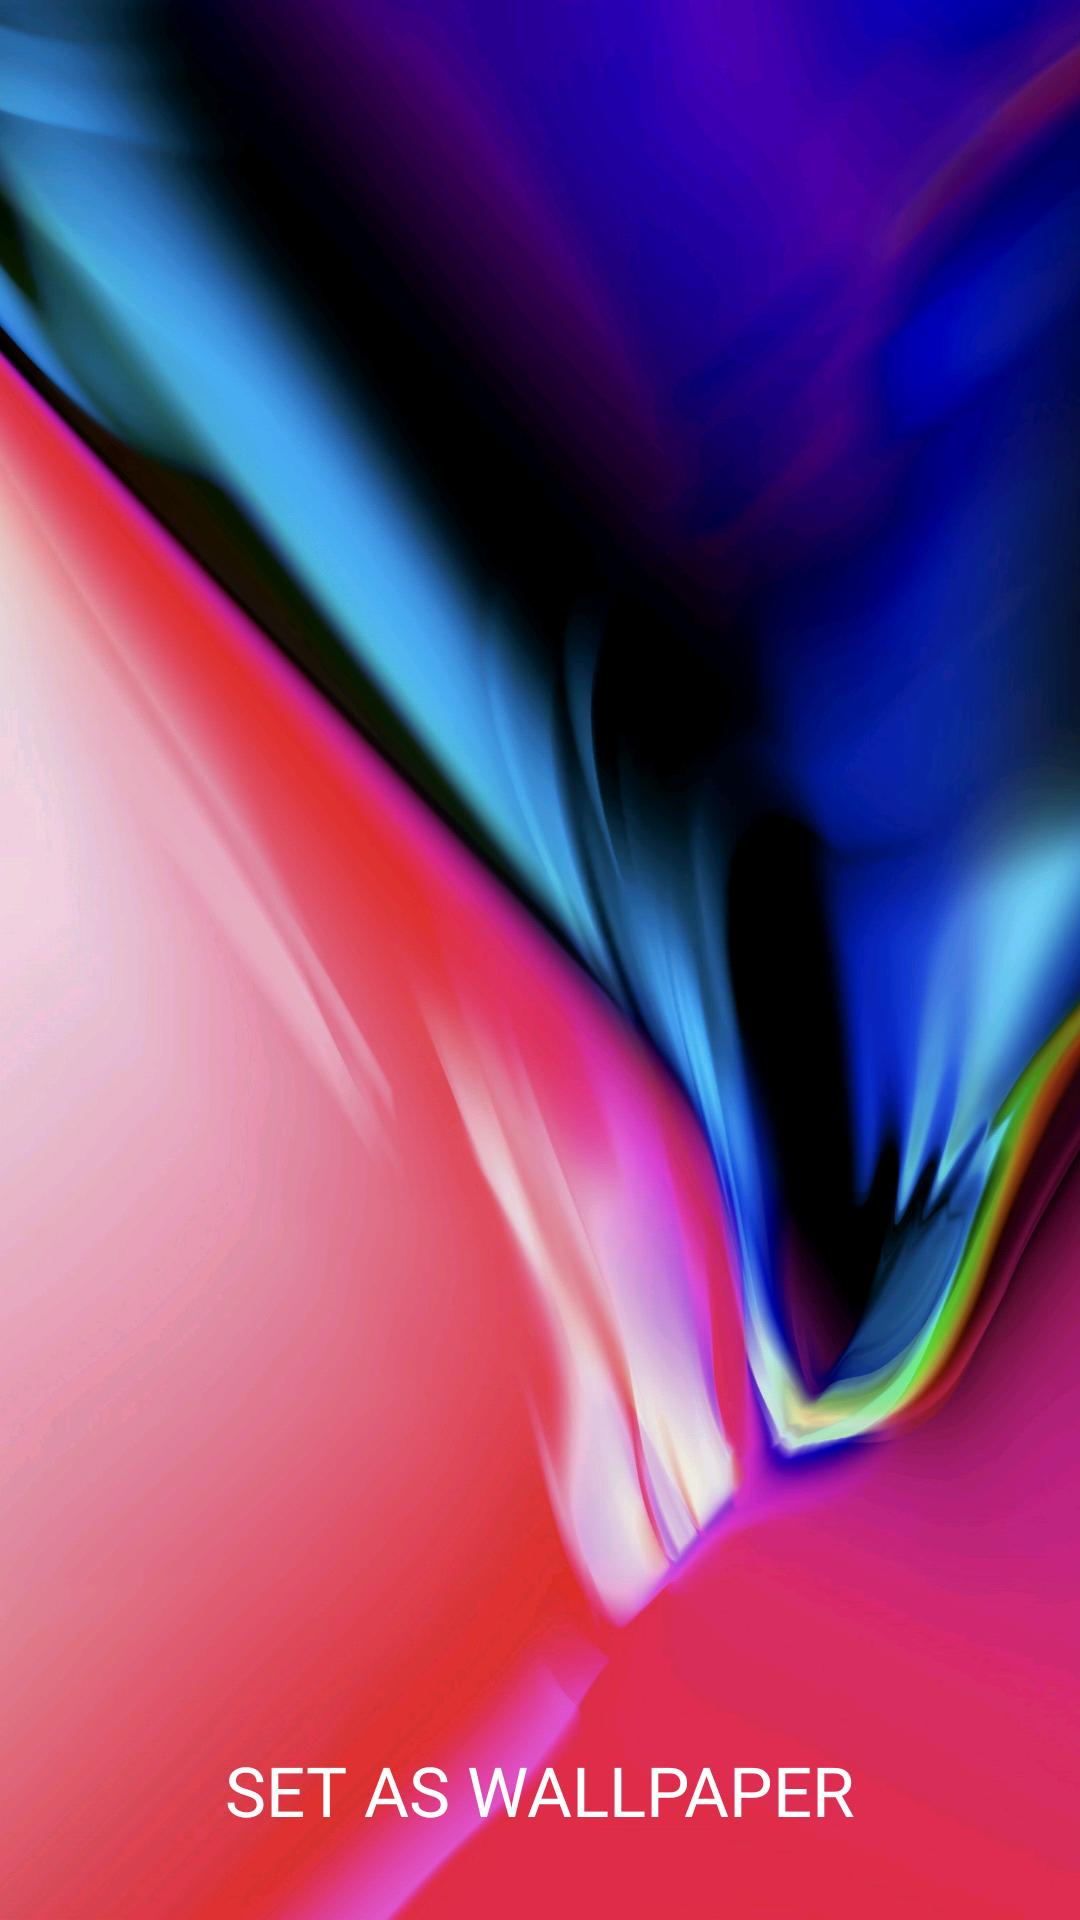 Wallpaper Iphone X Iphone 8 Best Ios Full Hd For Android Apk